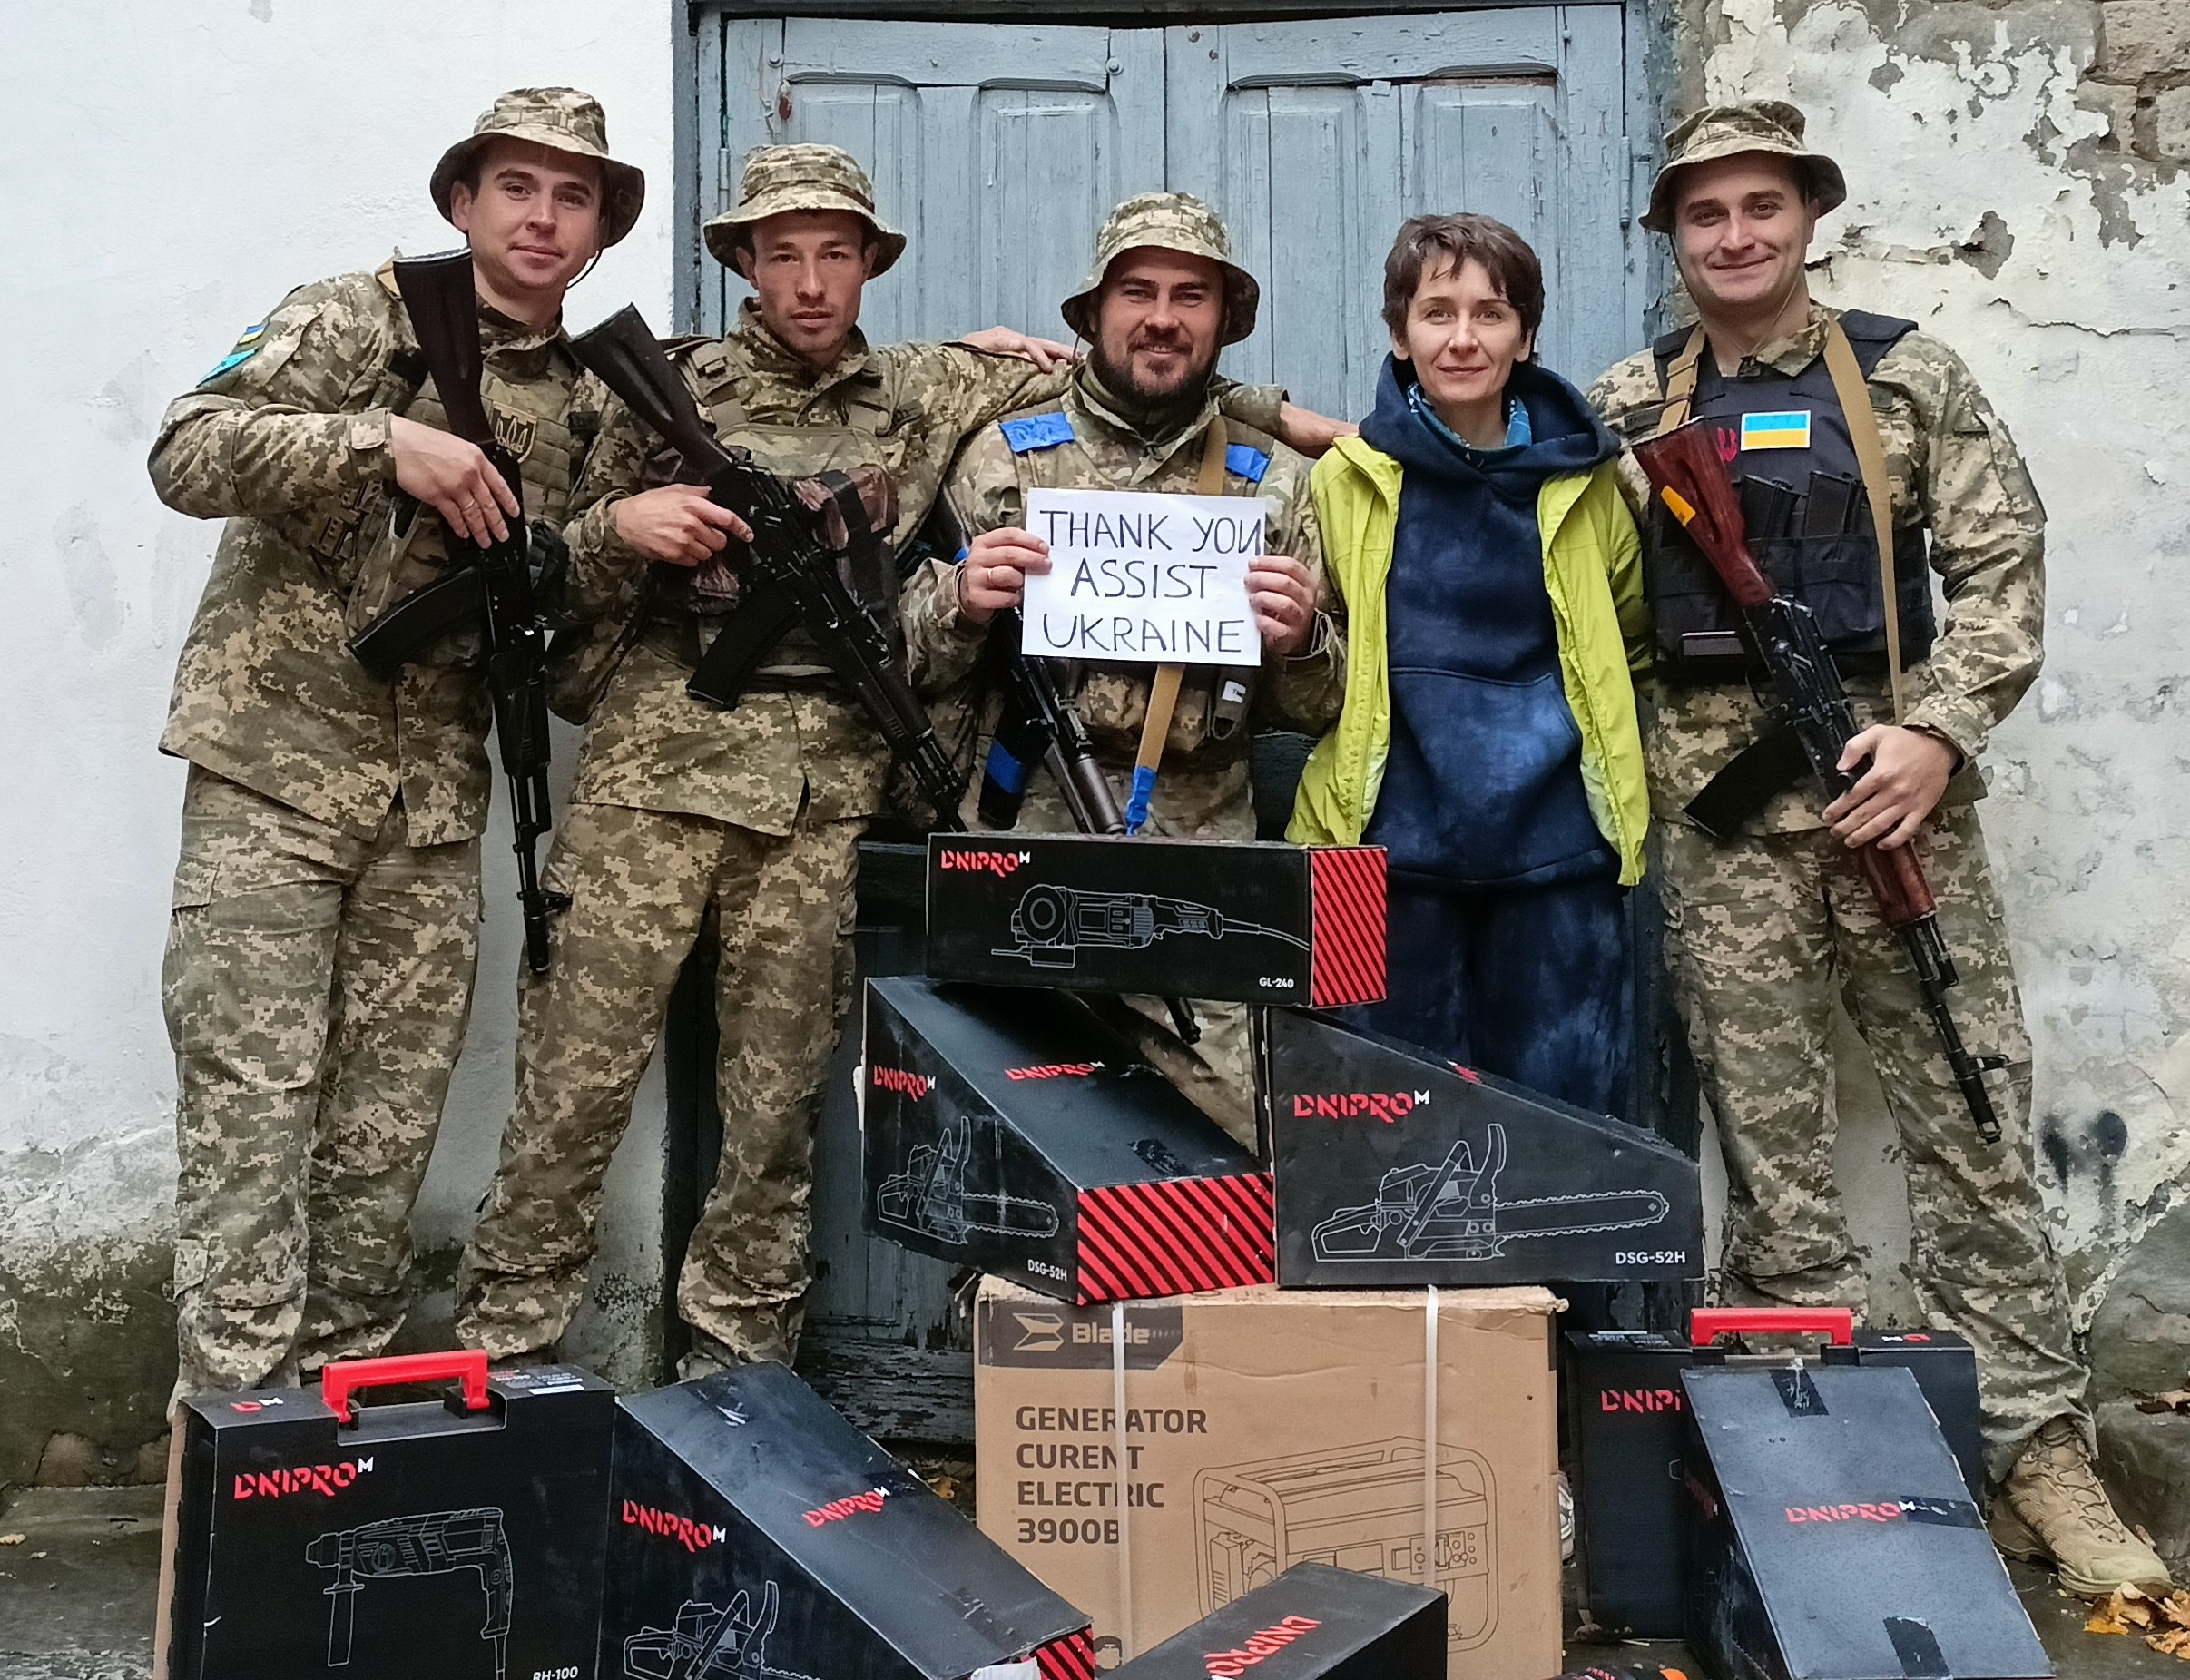 Four men in camouflage uniforms, each holding a rifle, pose for a photo with a woman in civilian clothes behind a pile of boxes. One is holding a sign that says, "Thank you, Assist Ukraine." 